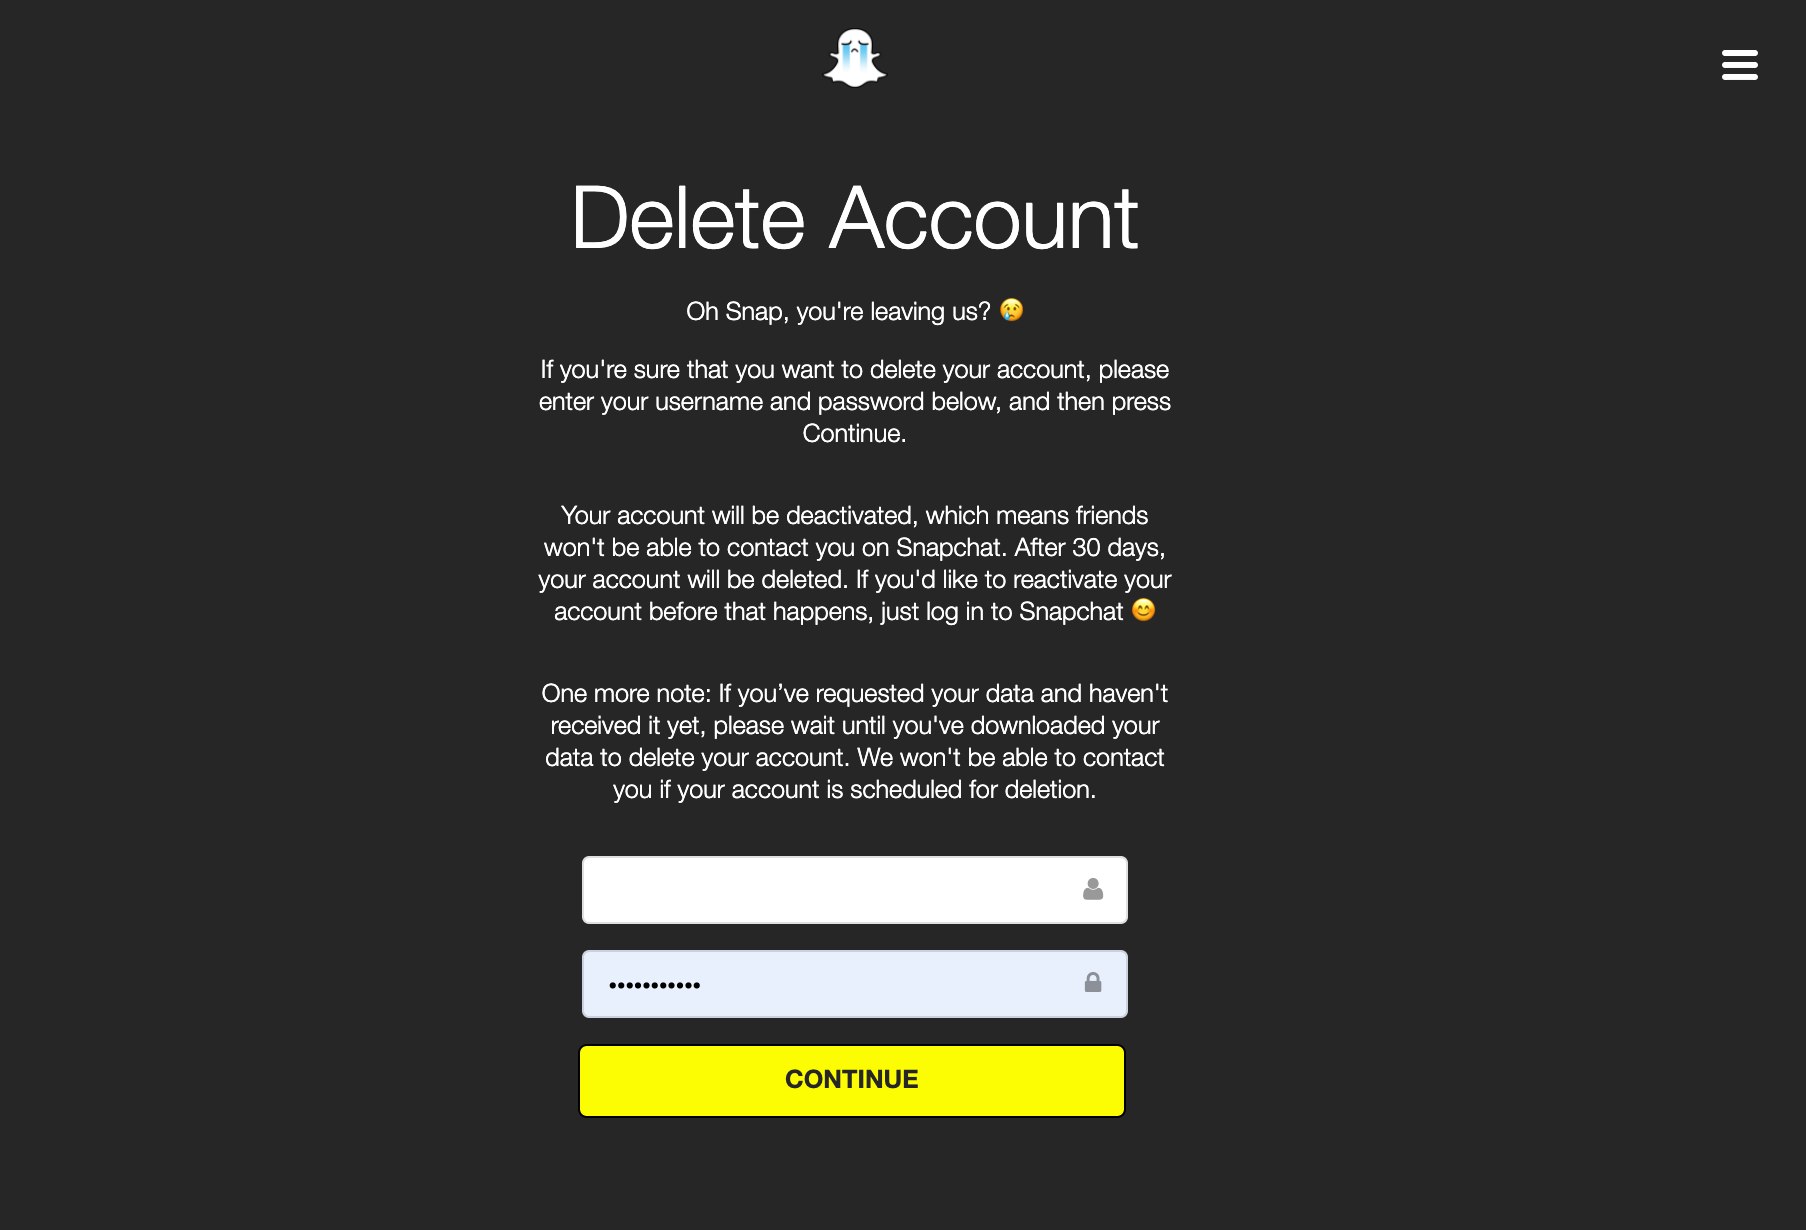 How to delete or deactivate Snapchat: Step by step guide